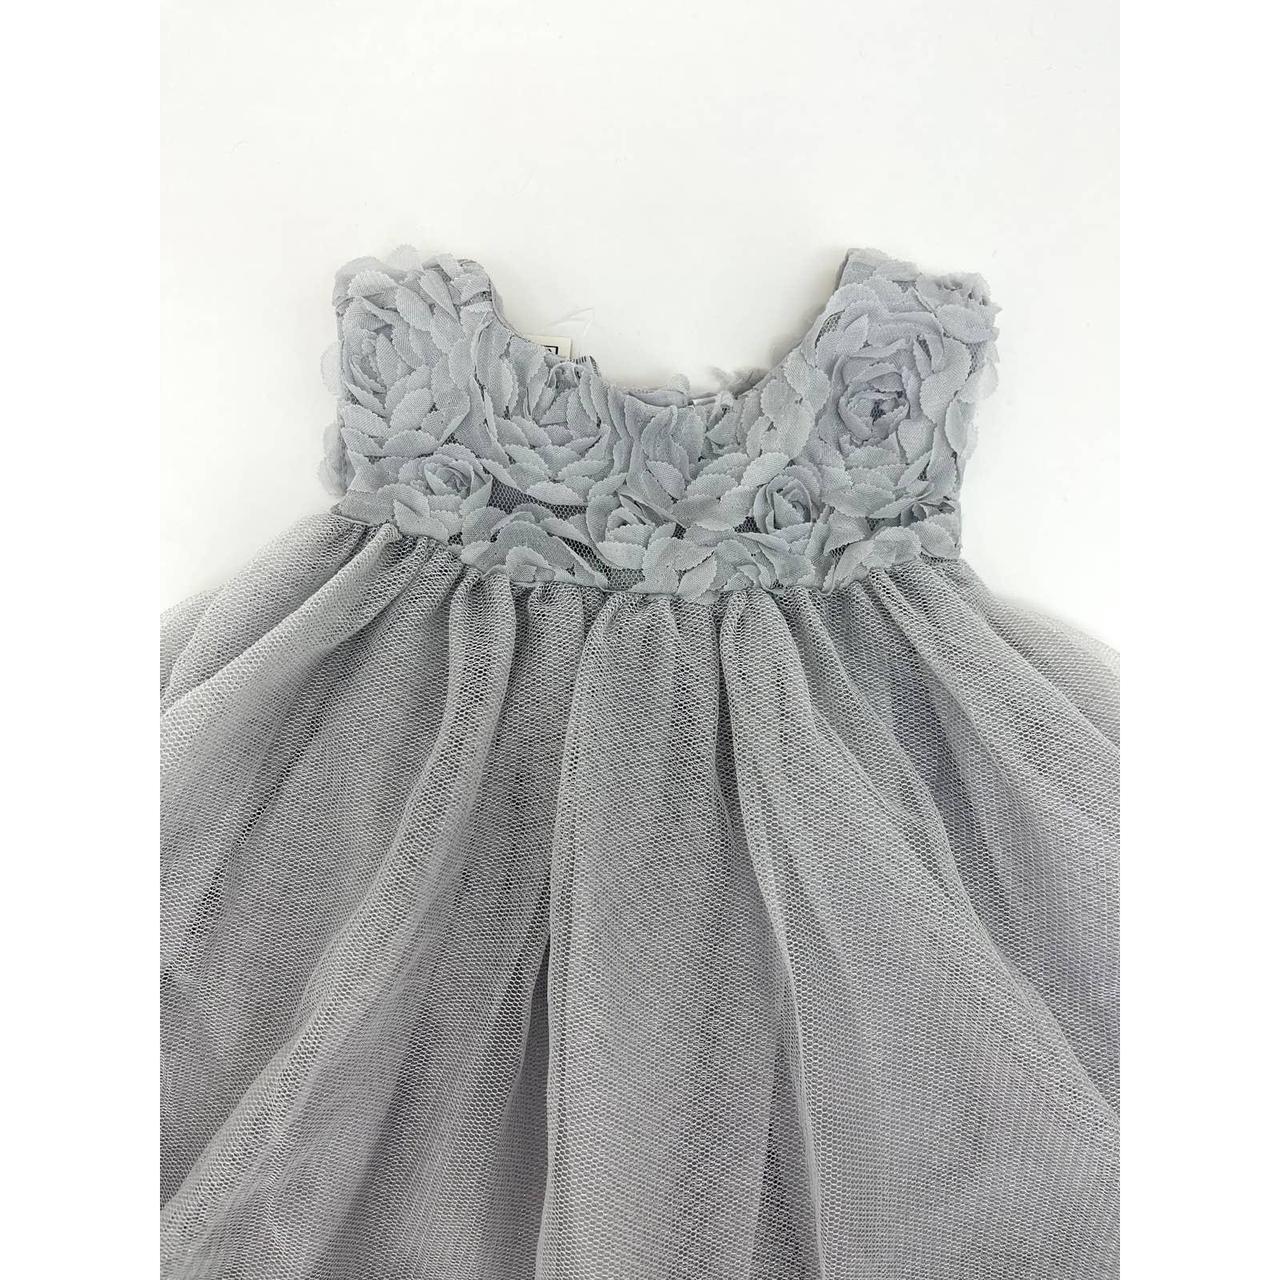 Product Image 2 - First Impressions Baby Girl Dress,